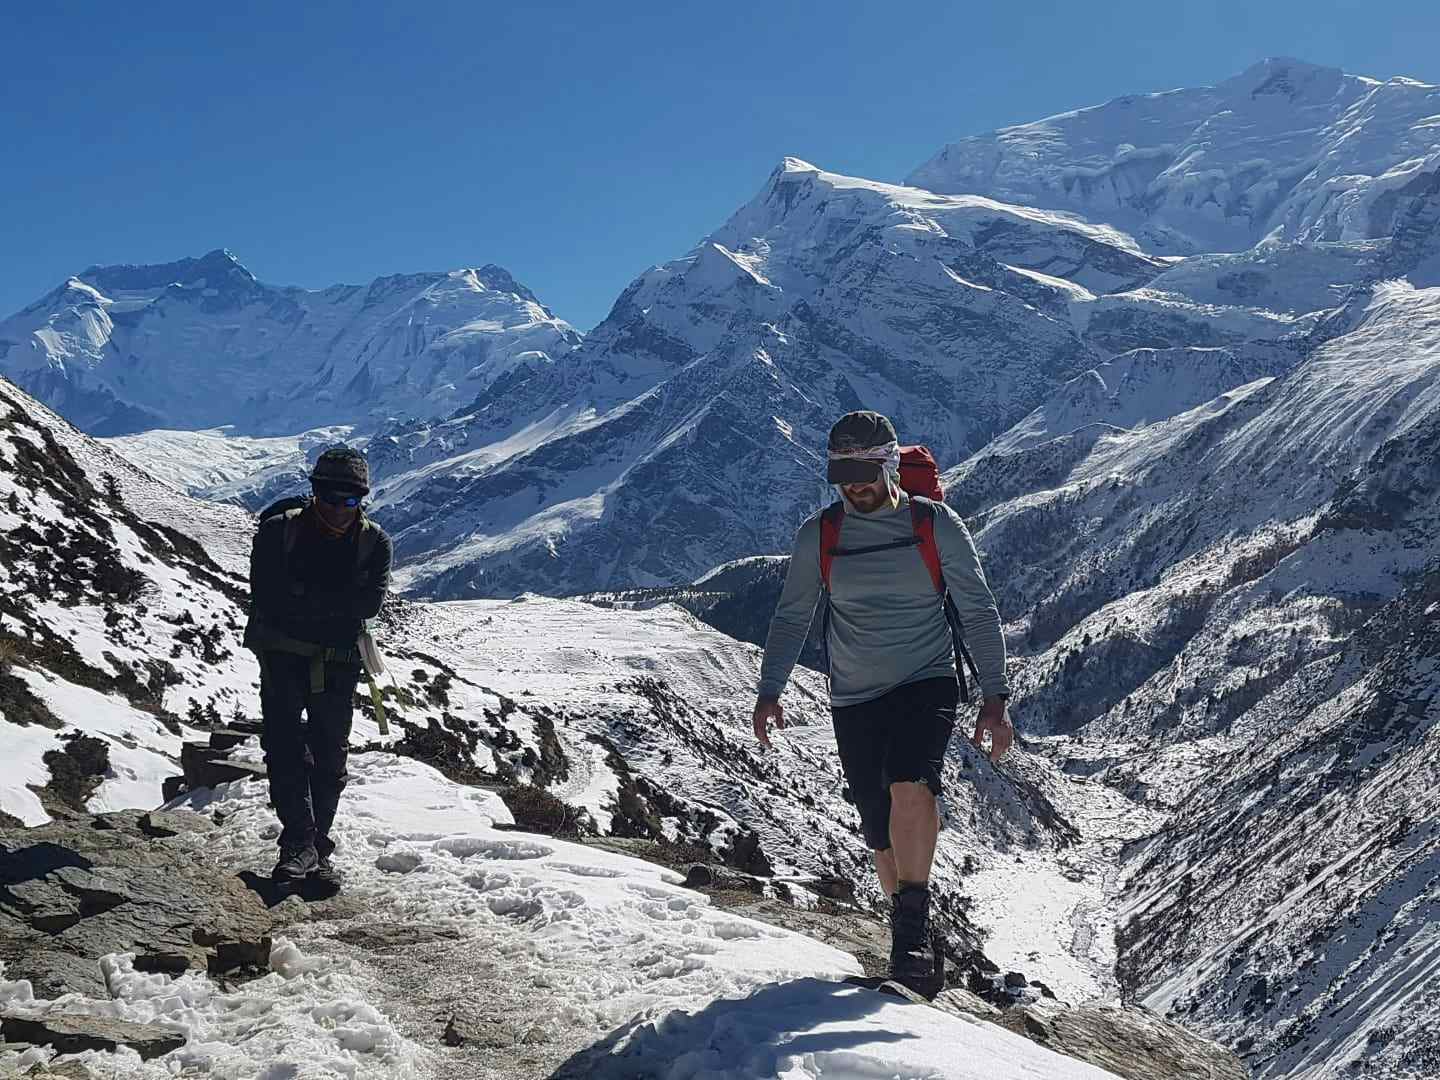 Two hikers on the way to Thorung Phedi Base Camp, Nepal.